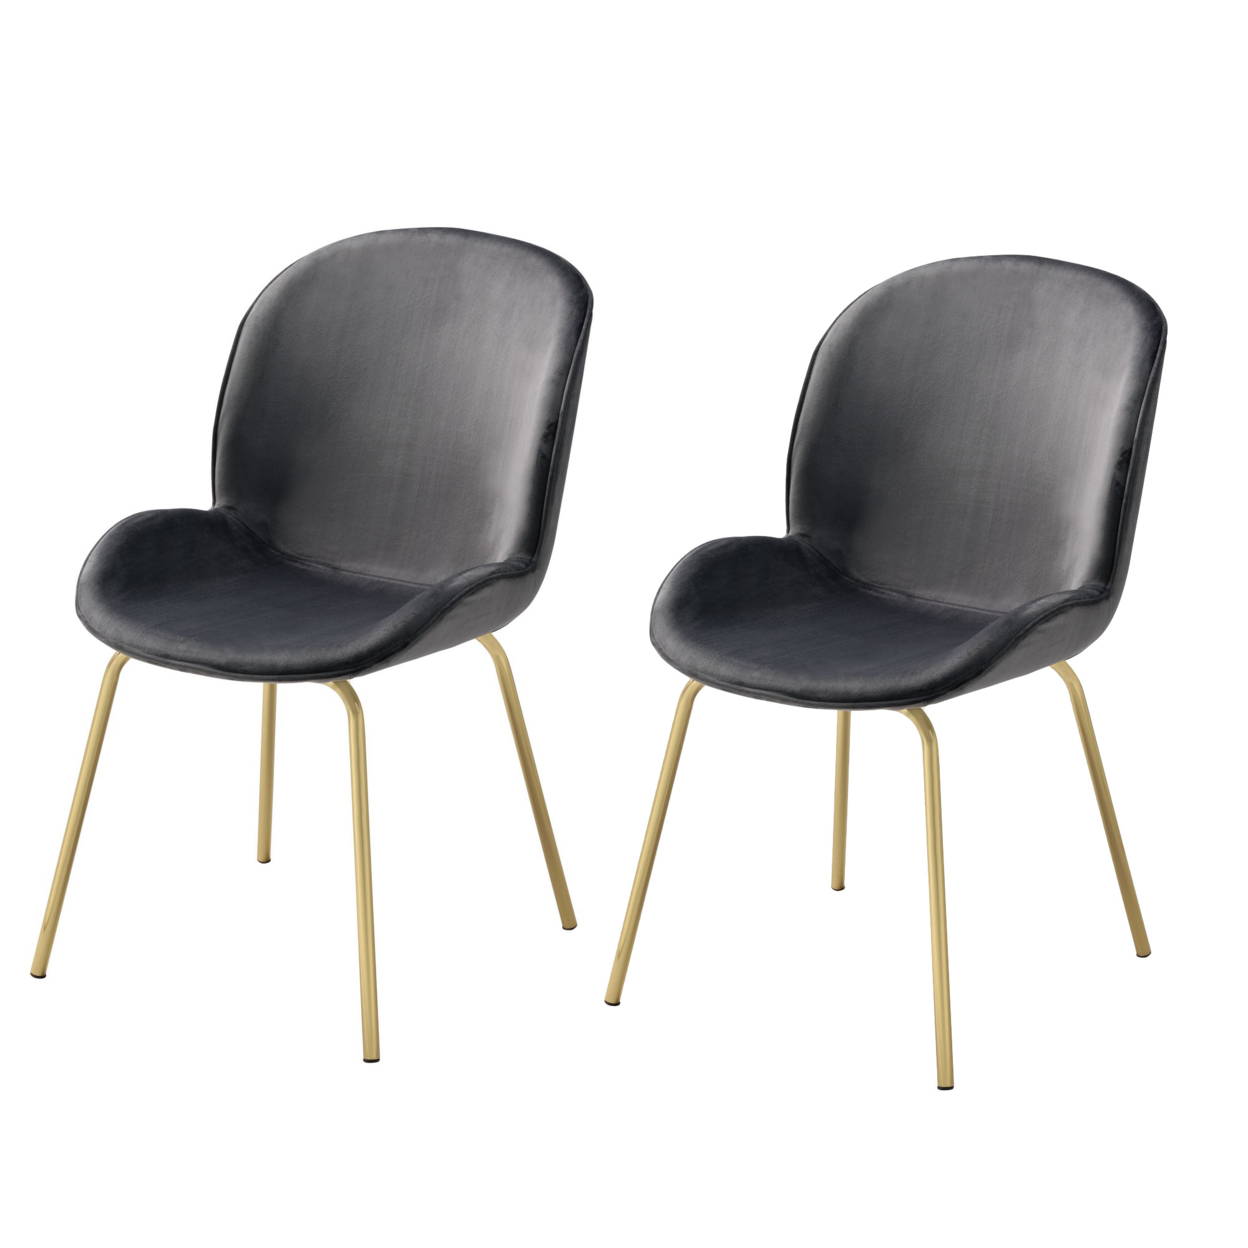 Side Chair With Padded Seat And Metal Legs, Set Of 2, Gray And Gold- Saltoro Sherpi